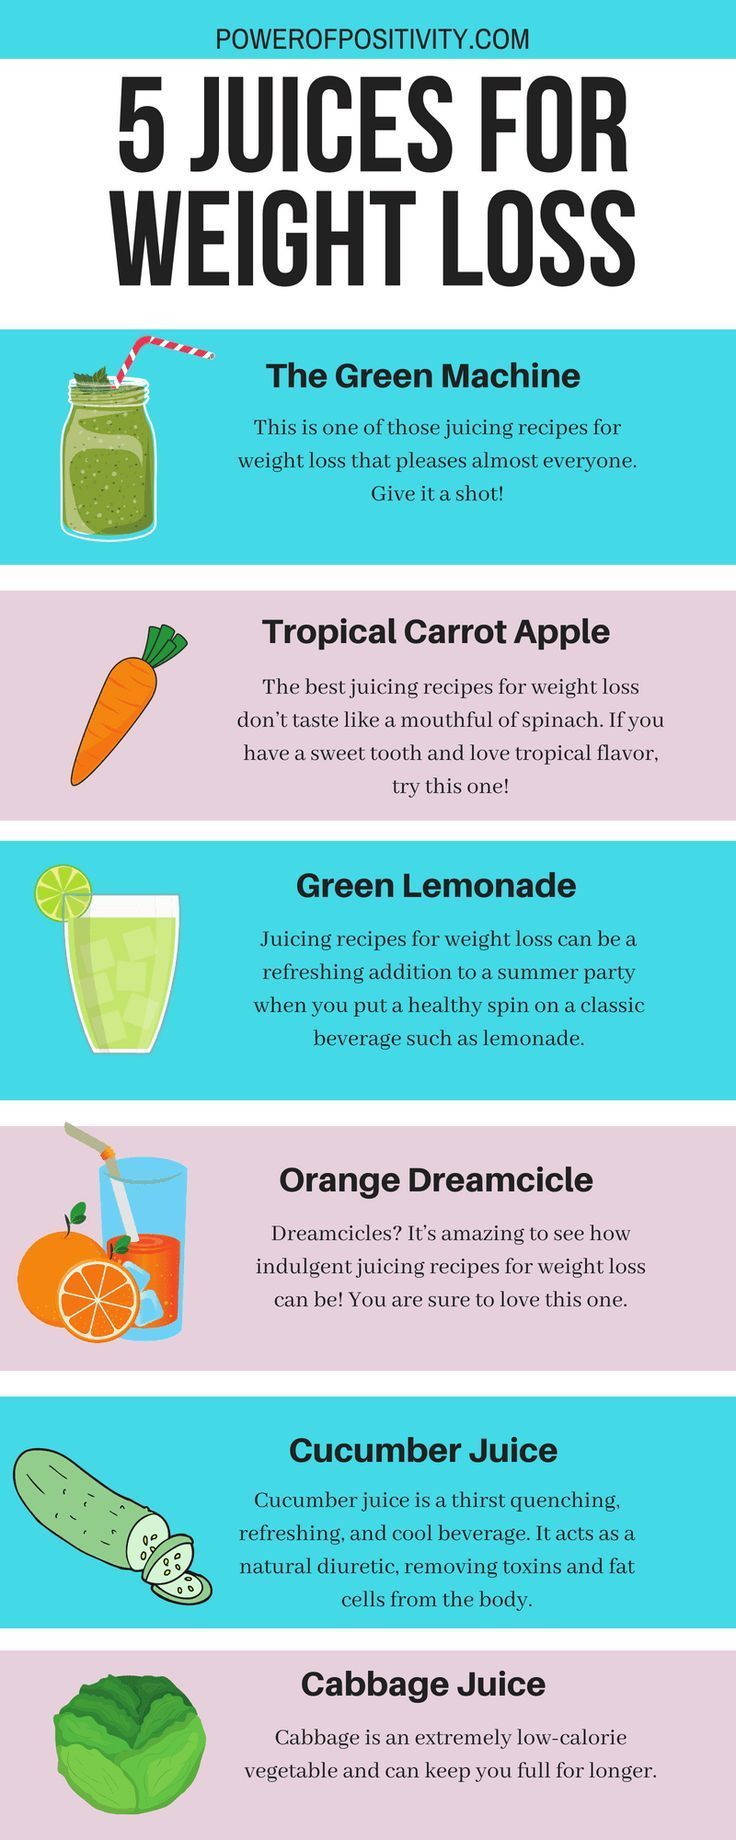 Juicing Recipes For Weight Loss: 7 Juices That Promote Weight Loss -   16 diet Juice health ideas